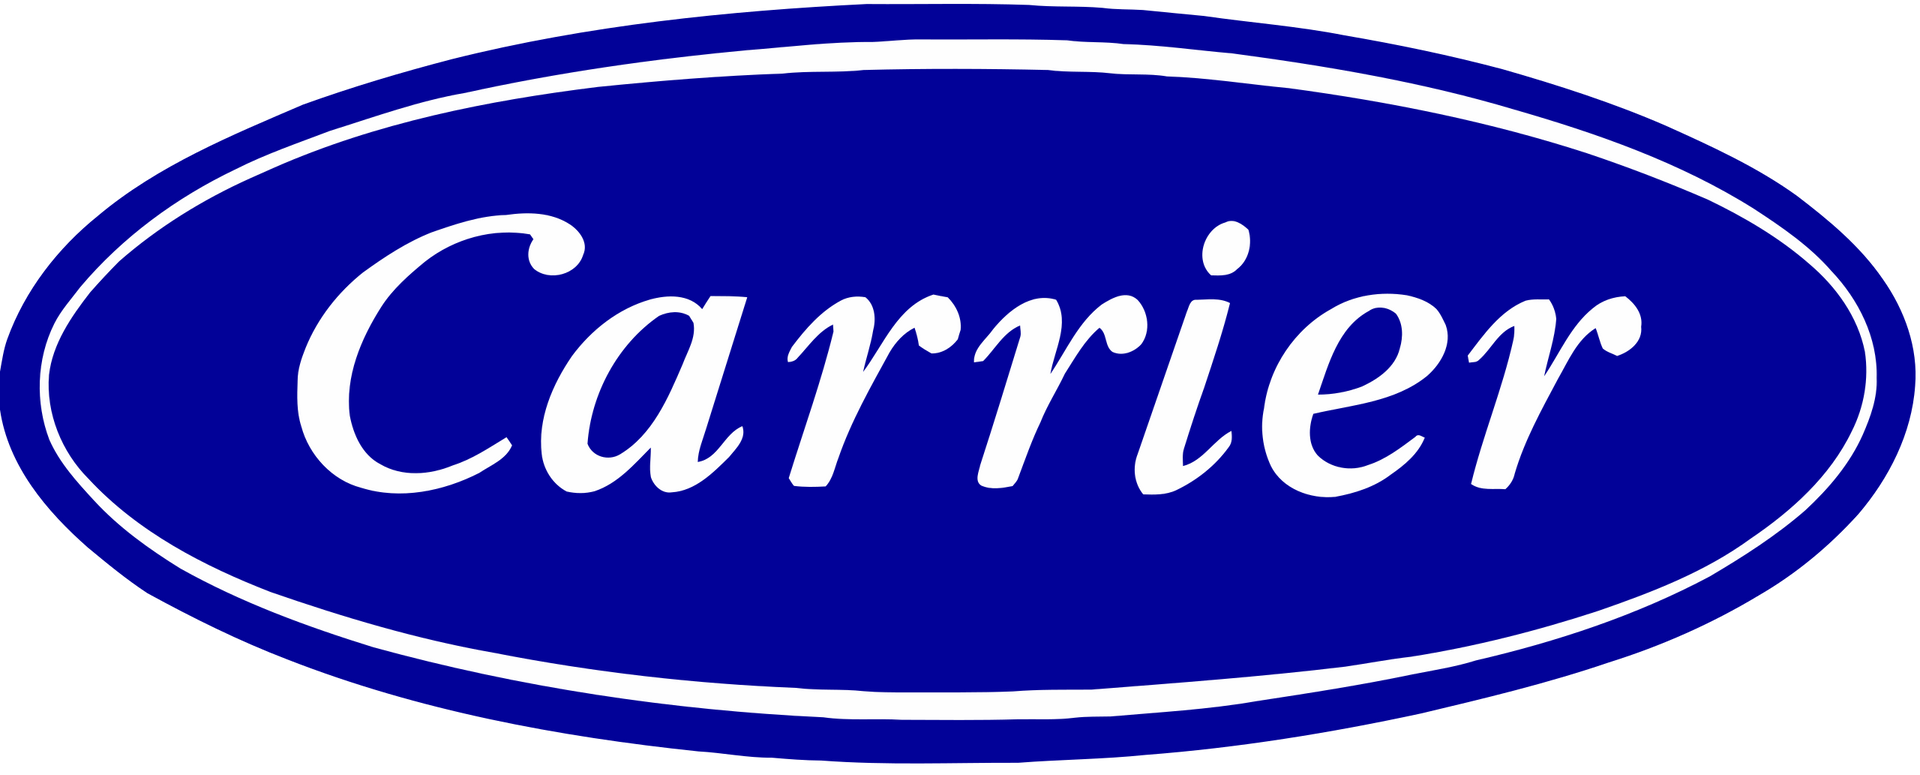 A blue and white carrier logo on a white background